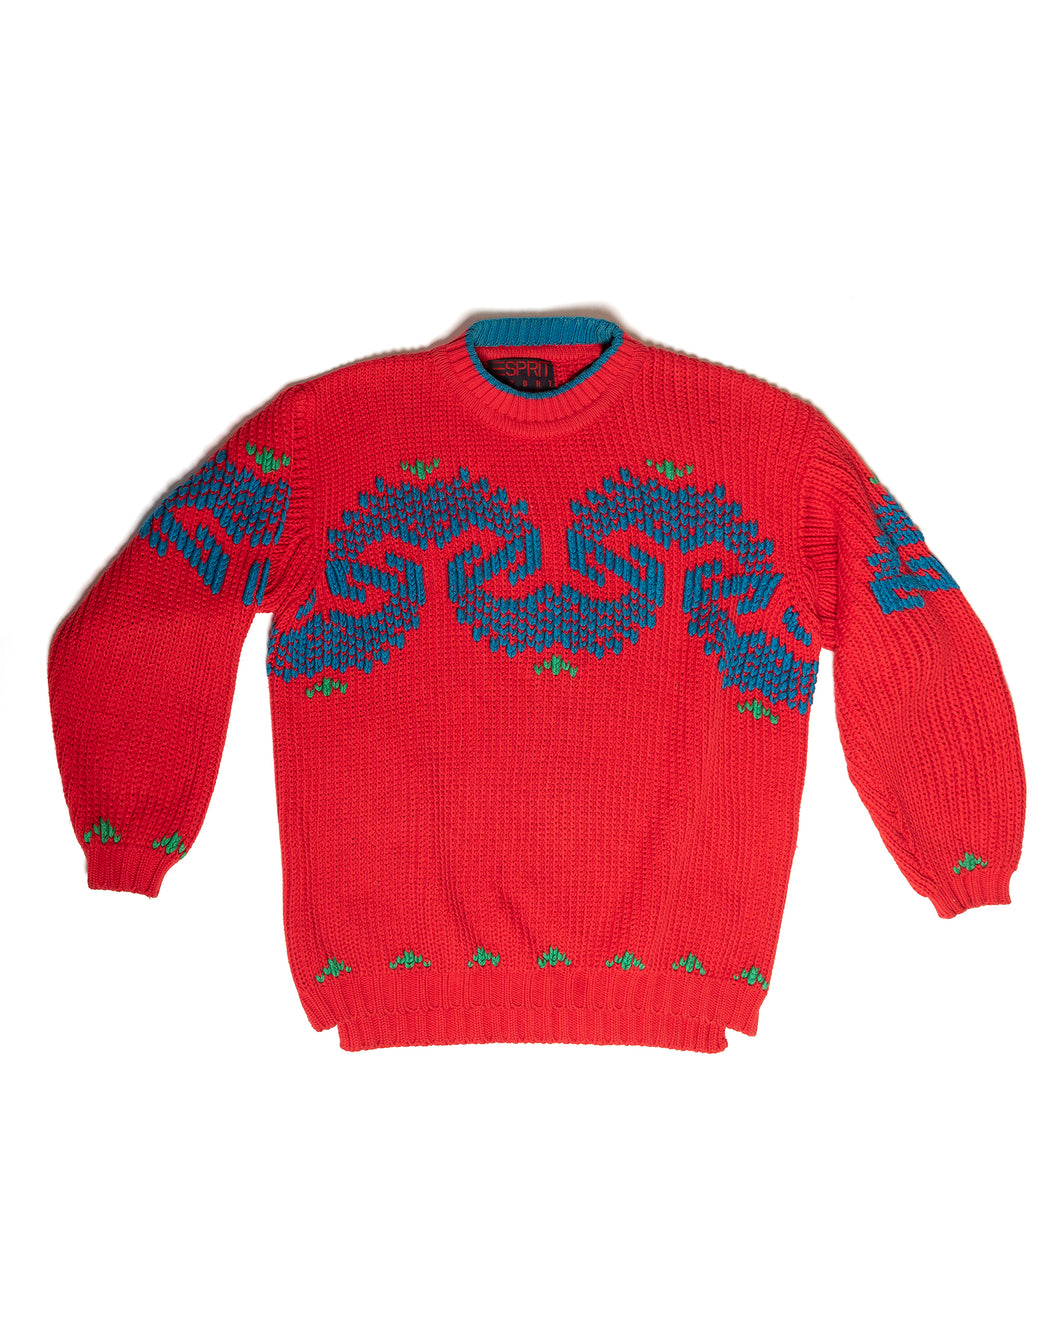 1980s Esprit Red Heavy Cotton Knit Sweater